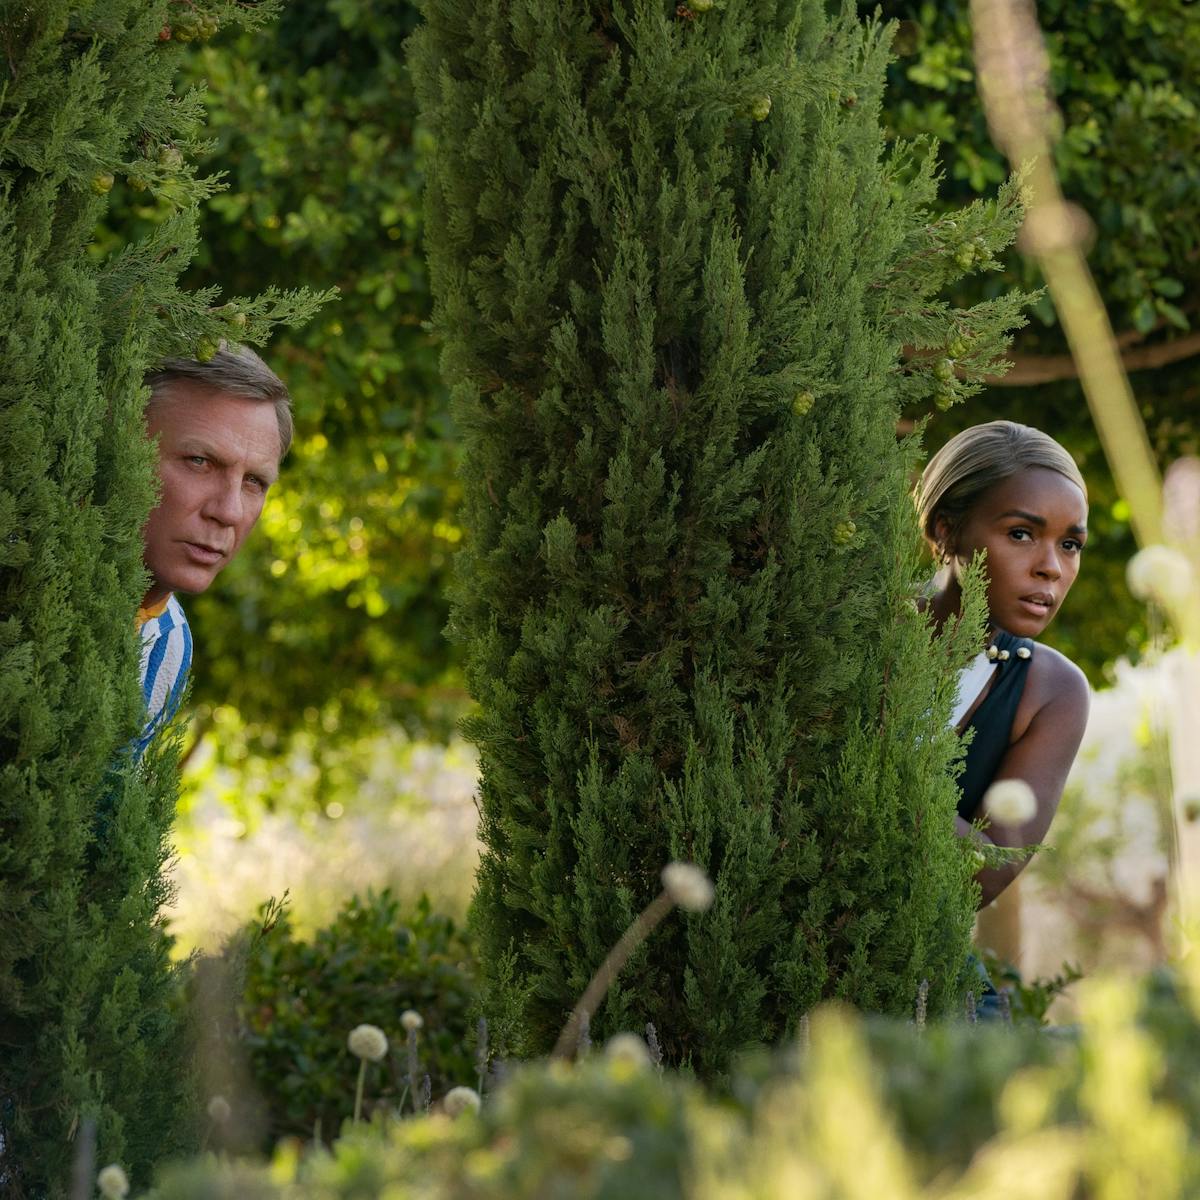 Daniel Craig and Janelle Monáe creep behind trees in this verdant scene.